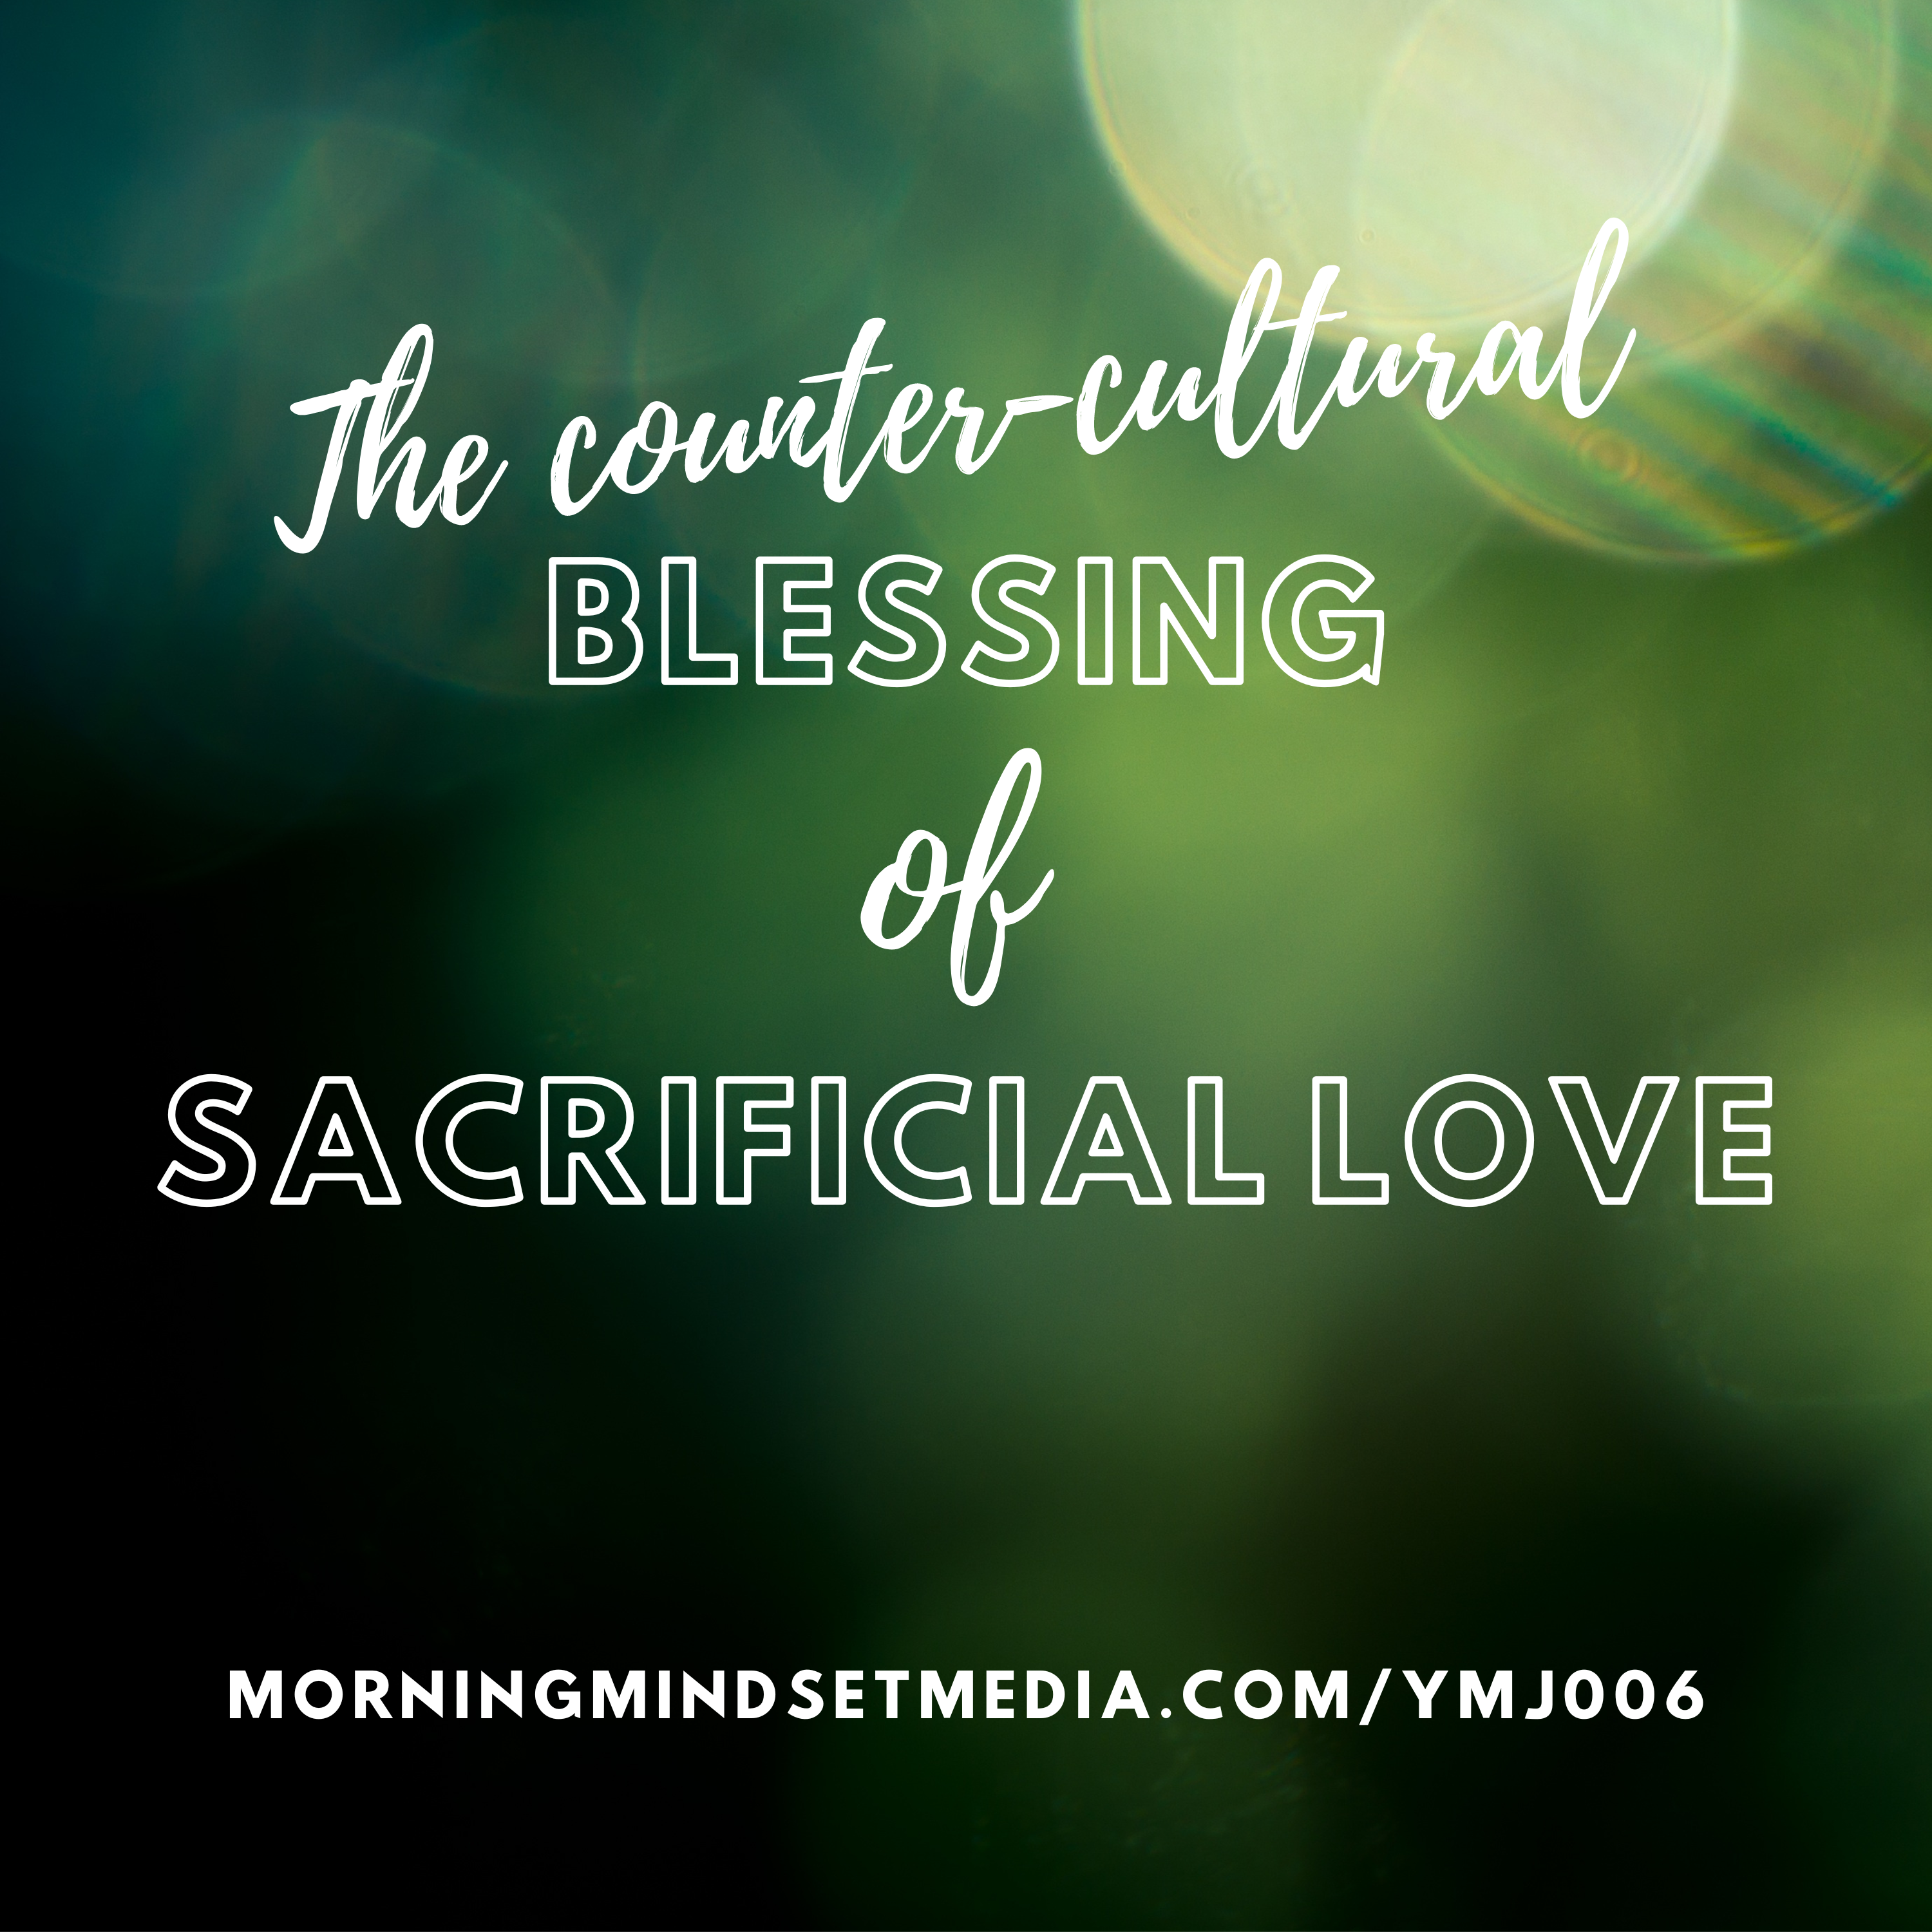 006: The counter cultural blessing of sacrificial love (2 of 2)